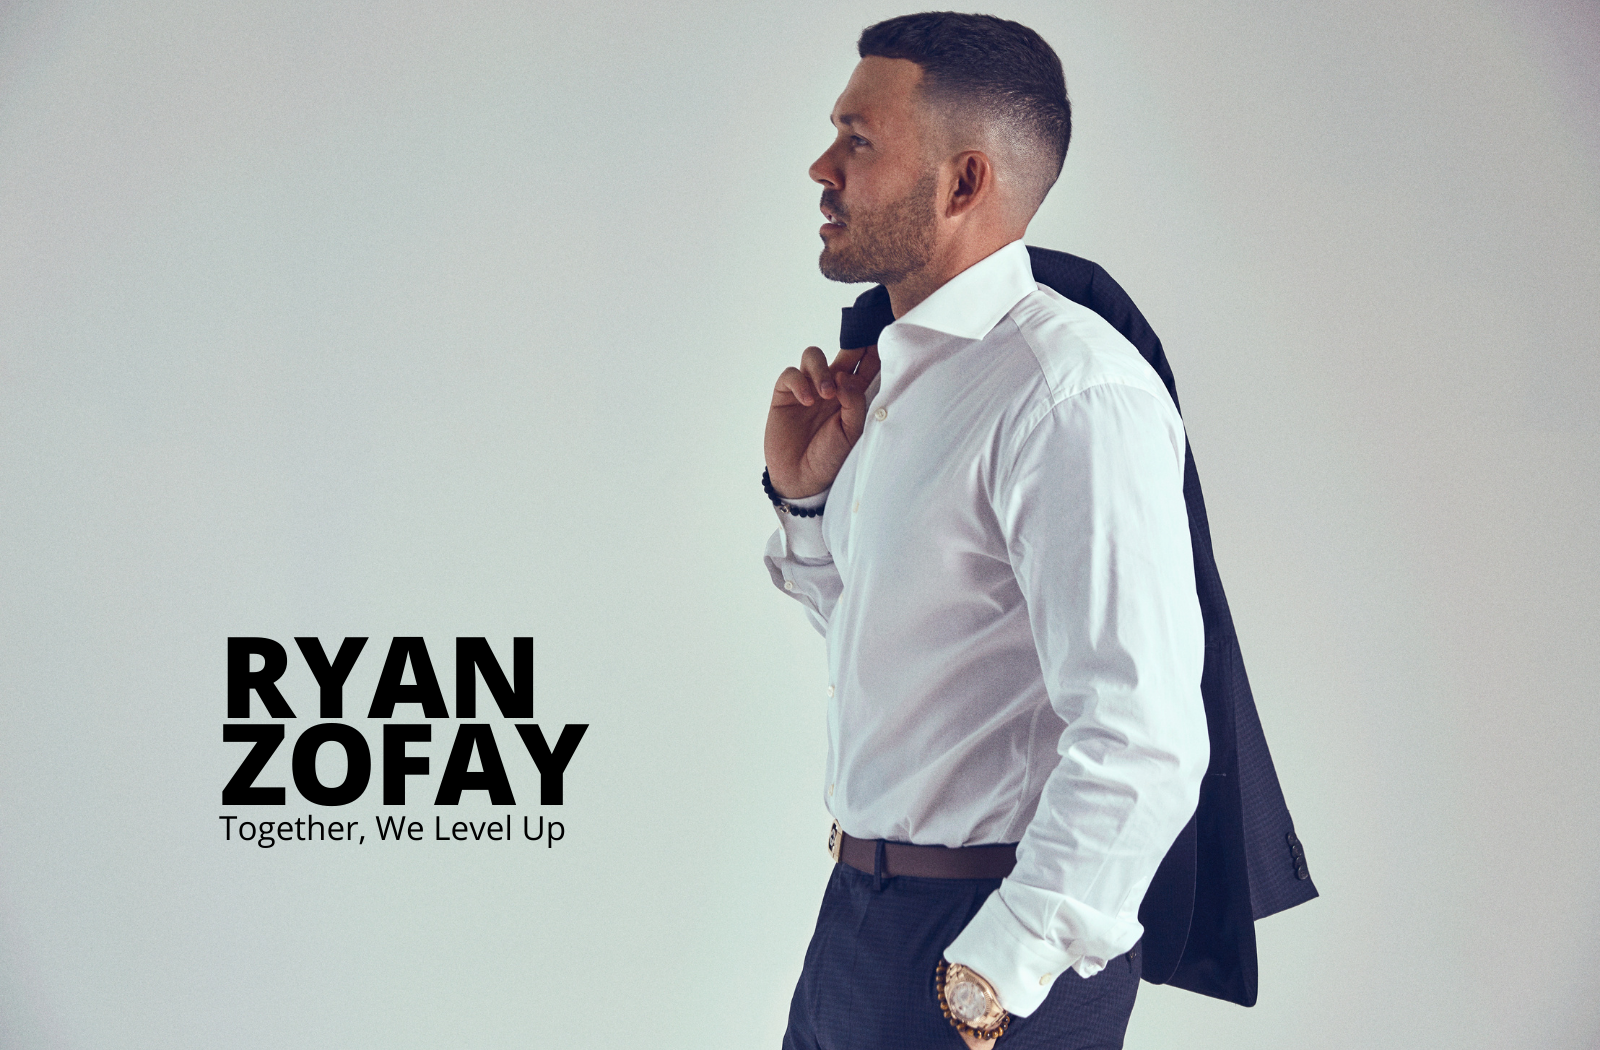 America's Coach & Entrepreneur. Ryan Zofay, author, speaker & influencer. Upcoming events, book Ryan for speaking engagements.